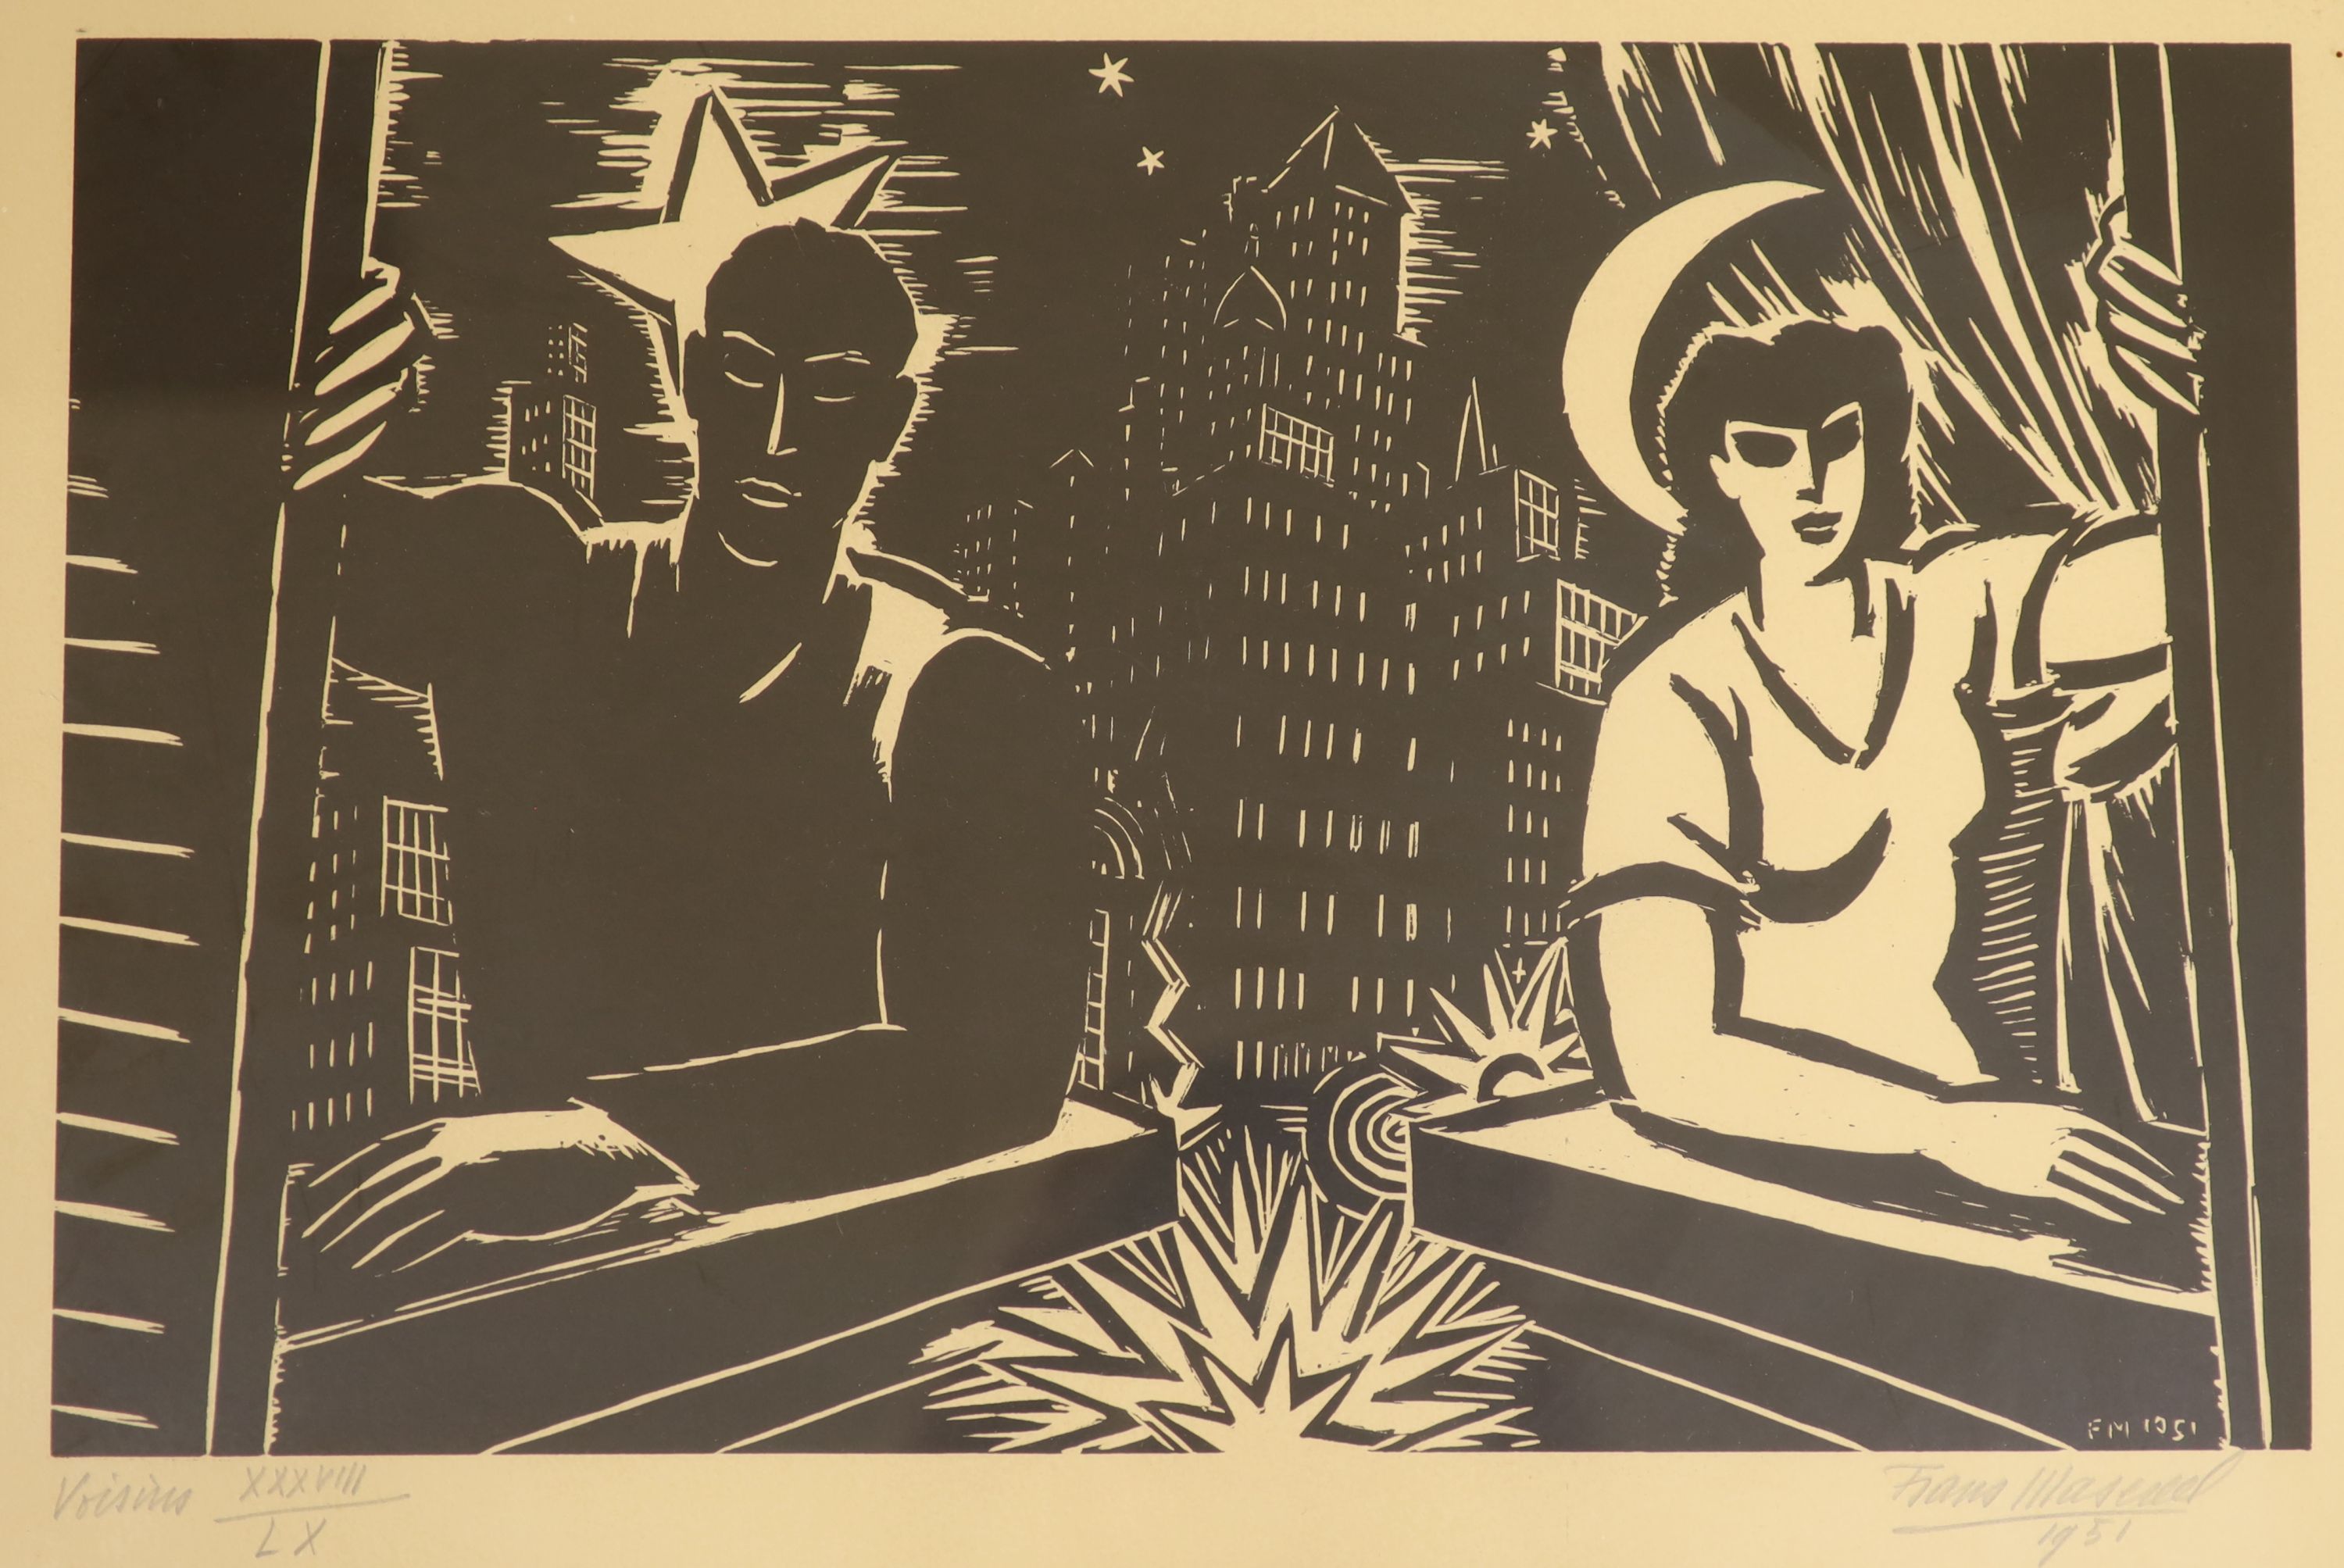 Frans Masereel (1889-1972), woodcut, 'Voisins', signed and dated 1951, XXXVIII/LX, 32 x 46cm